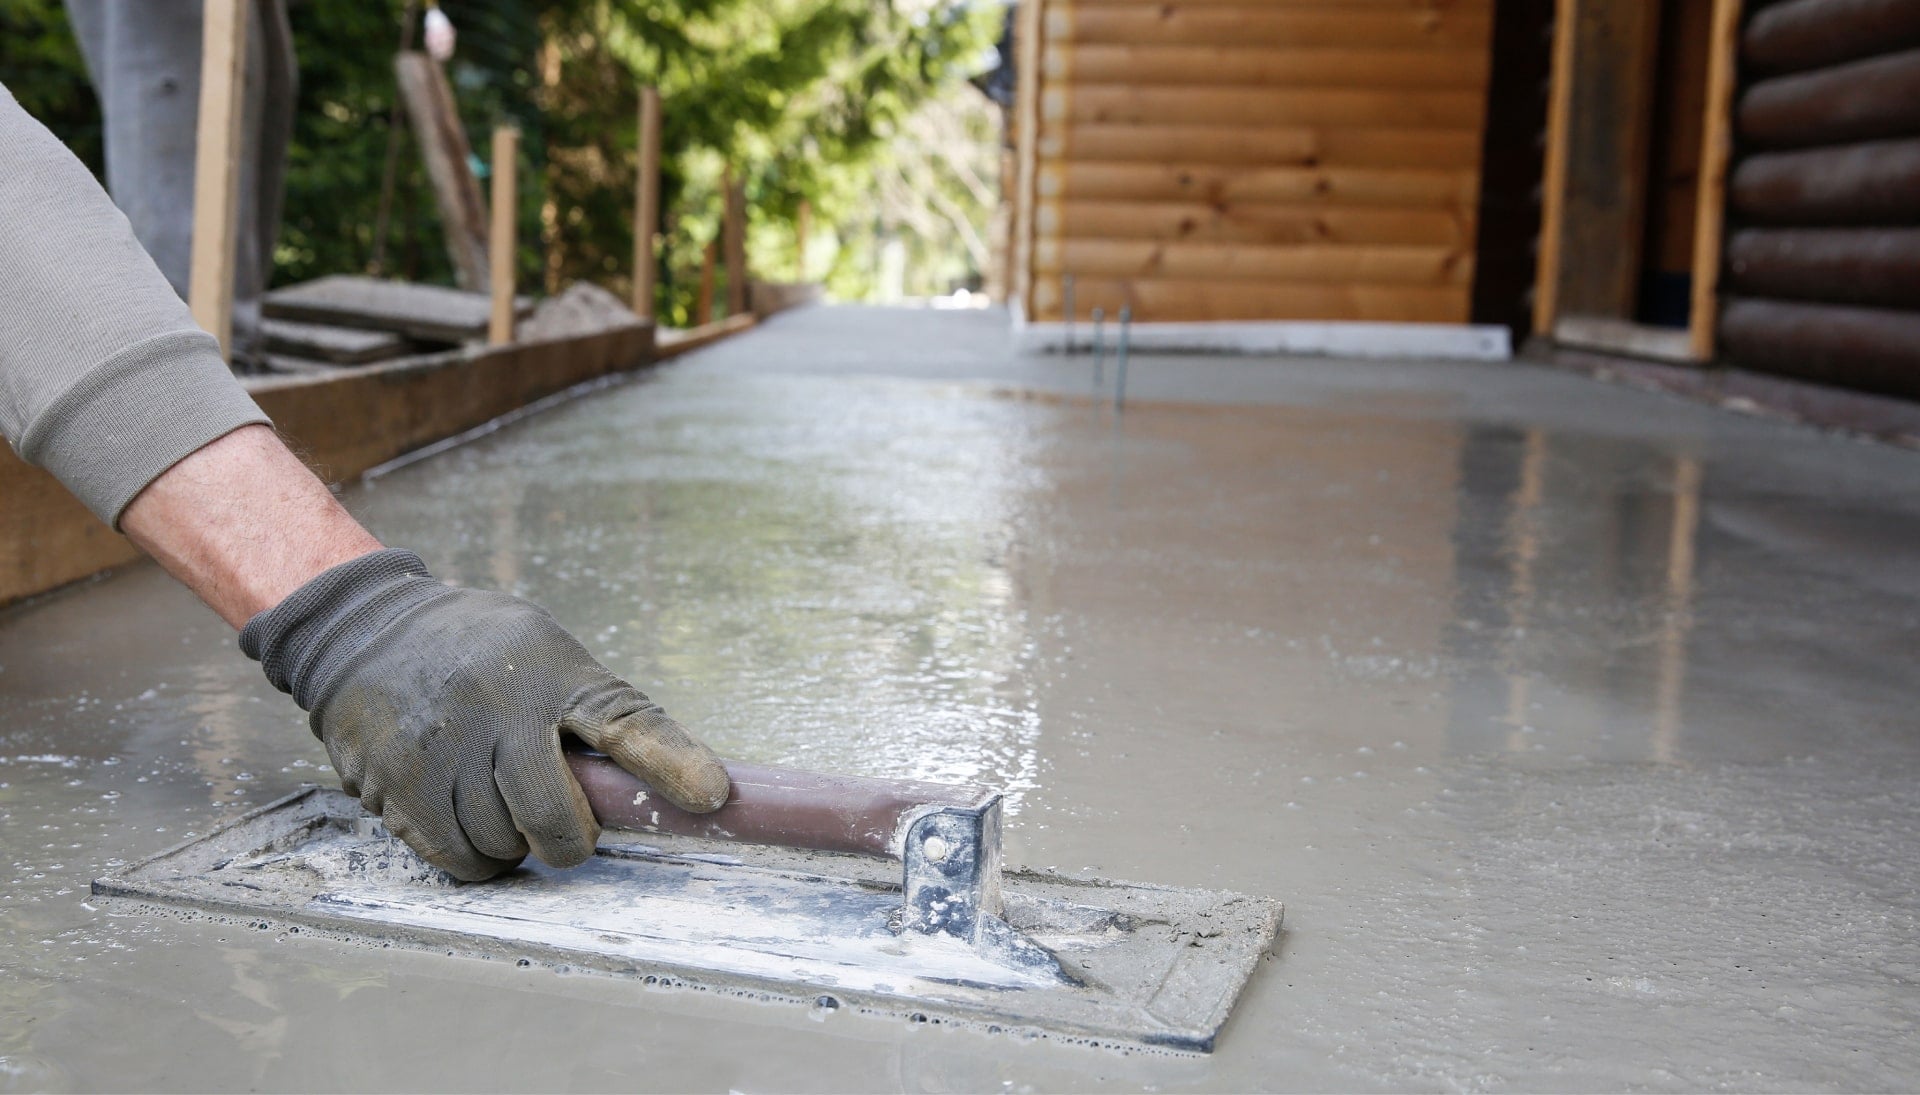 Smooth and Level Your Floors with Precision Concrete Floor Leveling Services in Detroit, MI - Eliminate Uneven Surfaces, Tripping Hazards, and Costly Damages with State-of-the-Art Equipment and Skilled Professionals.